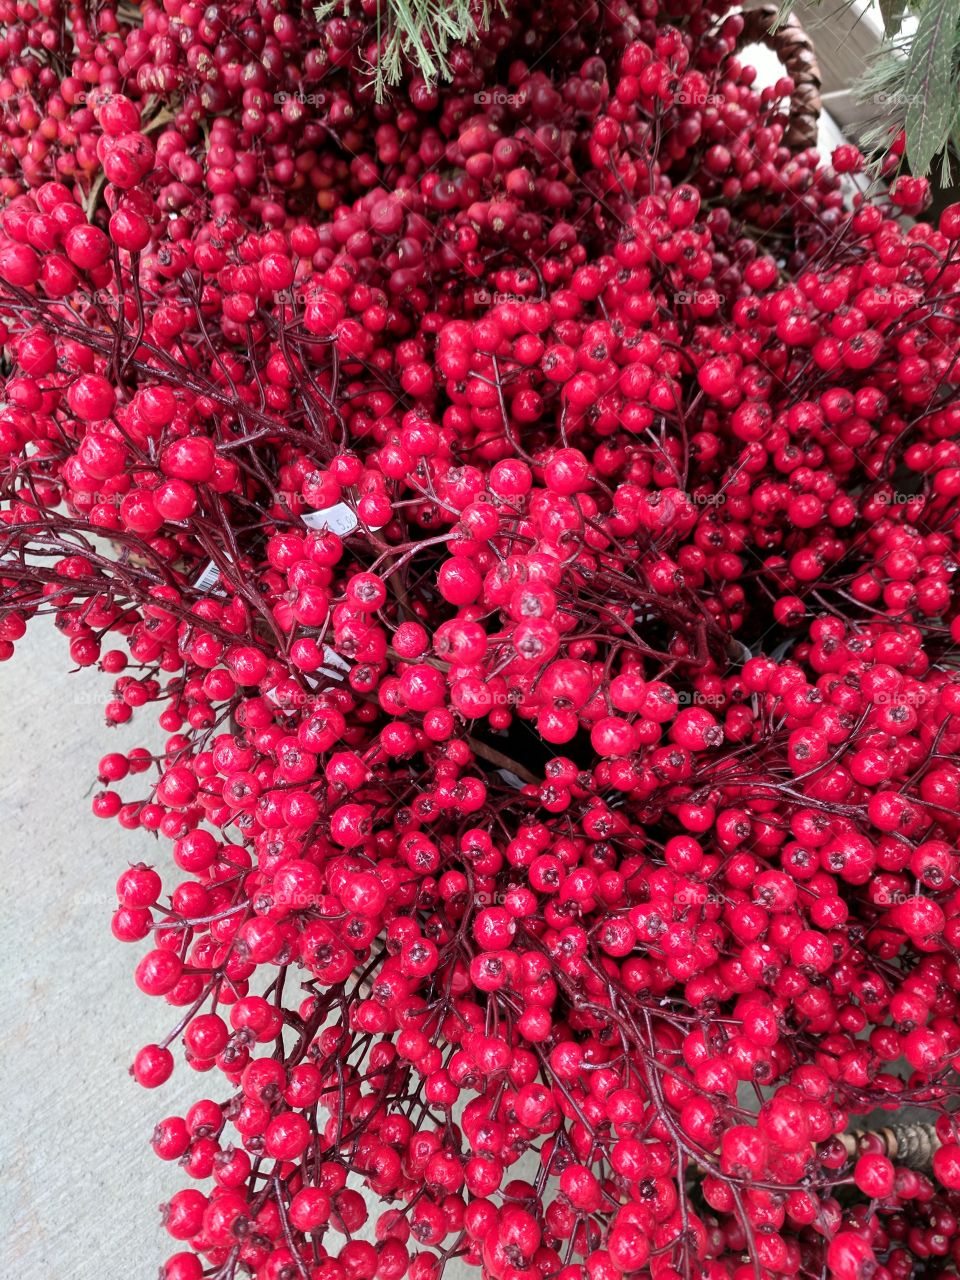 Berries for Sale